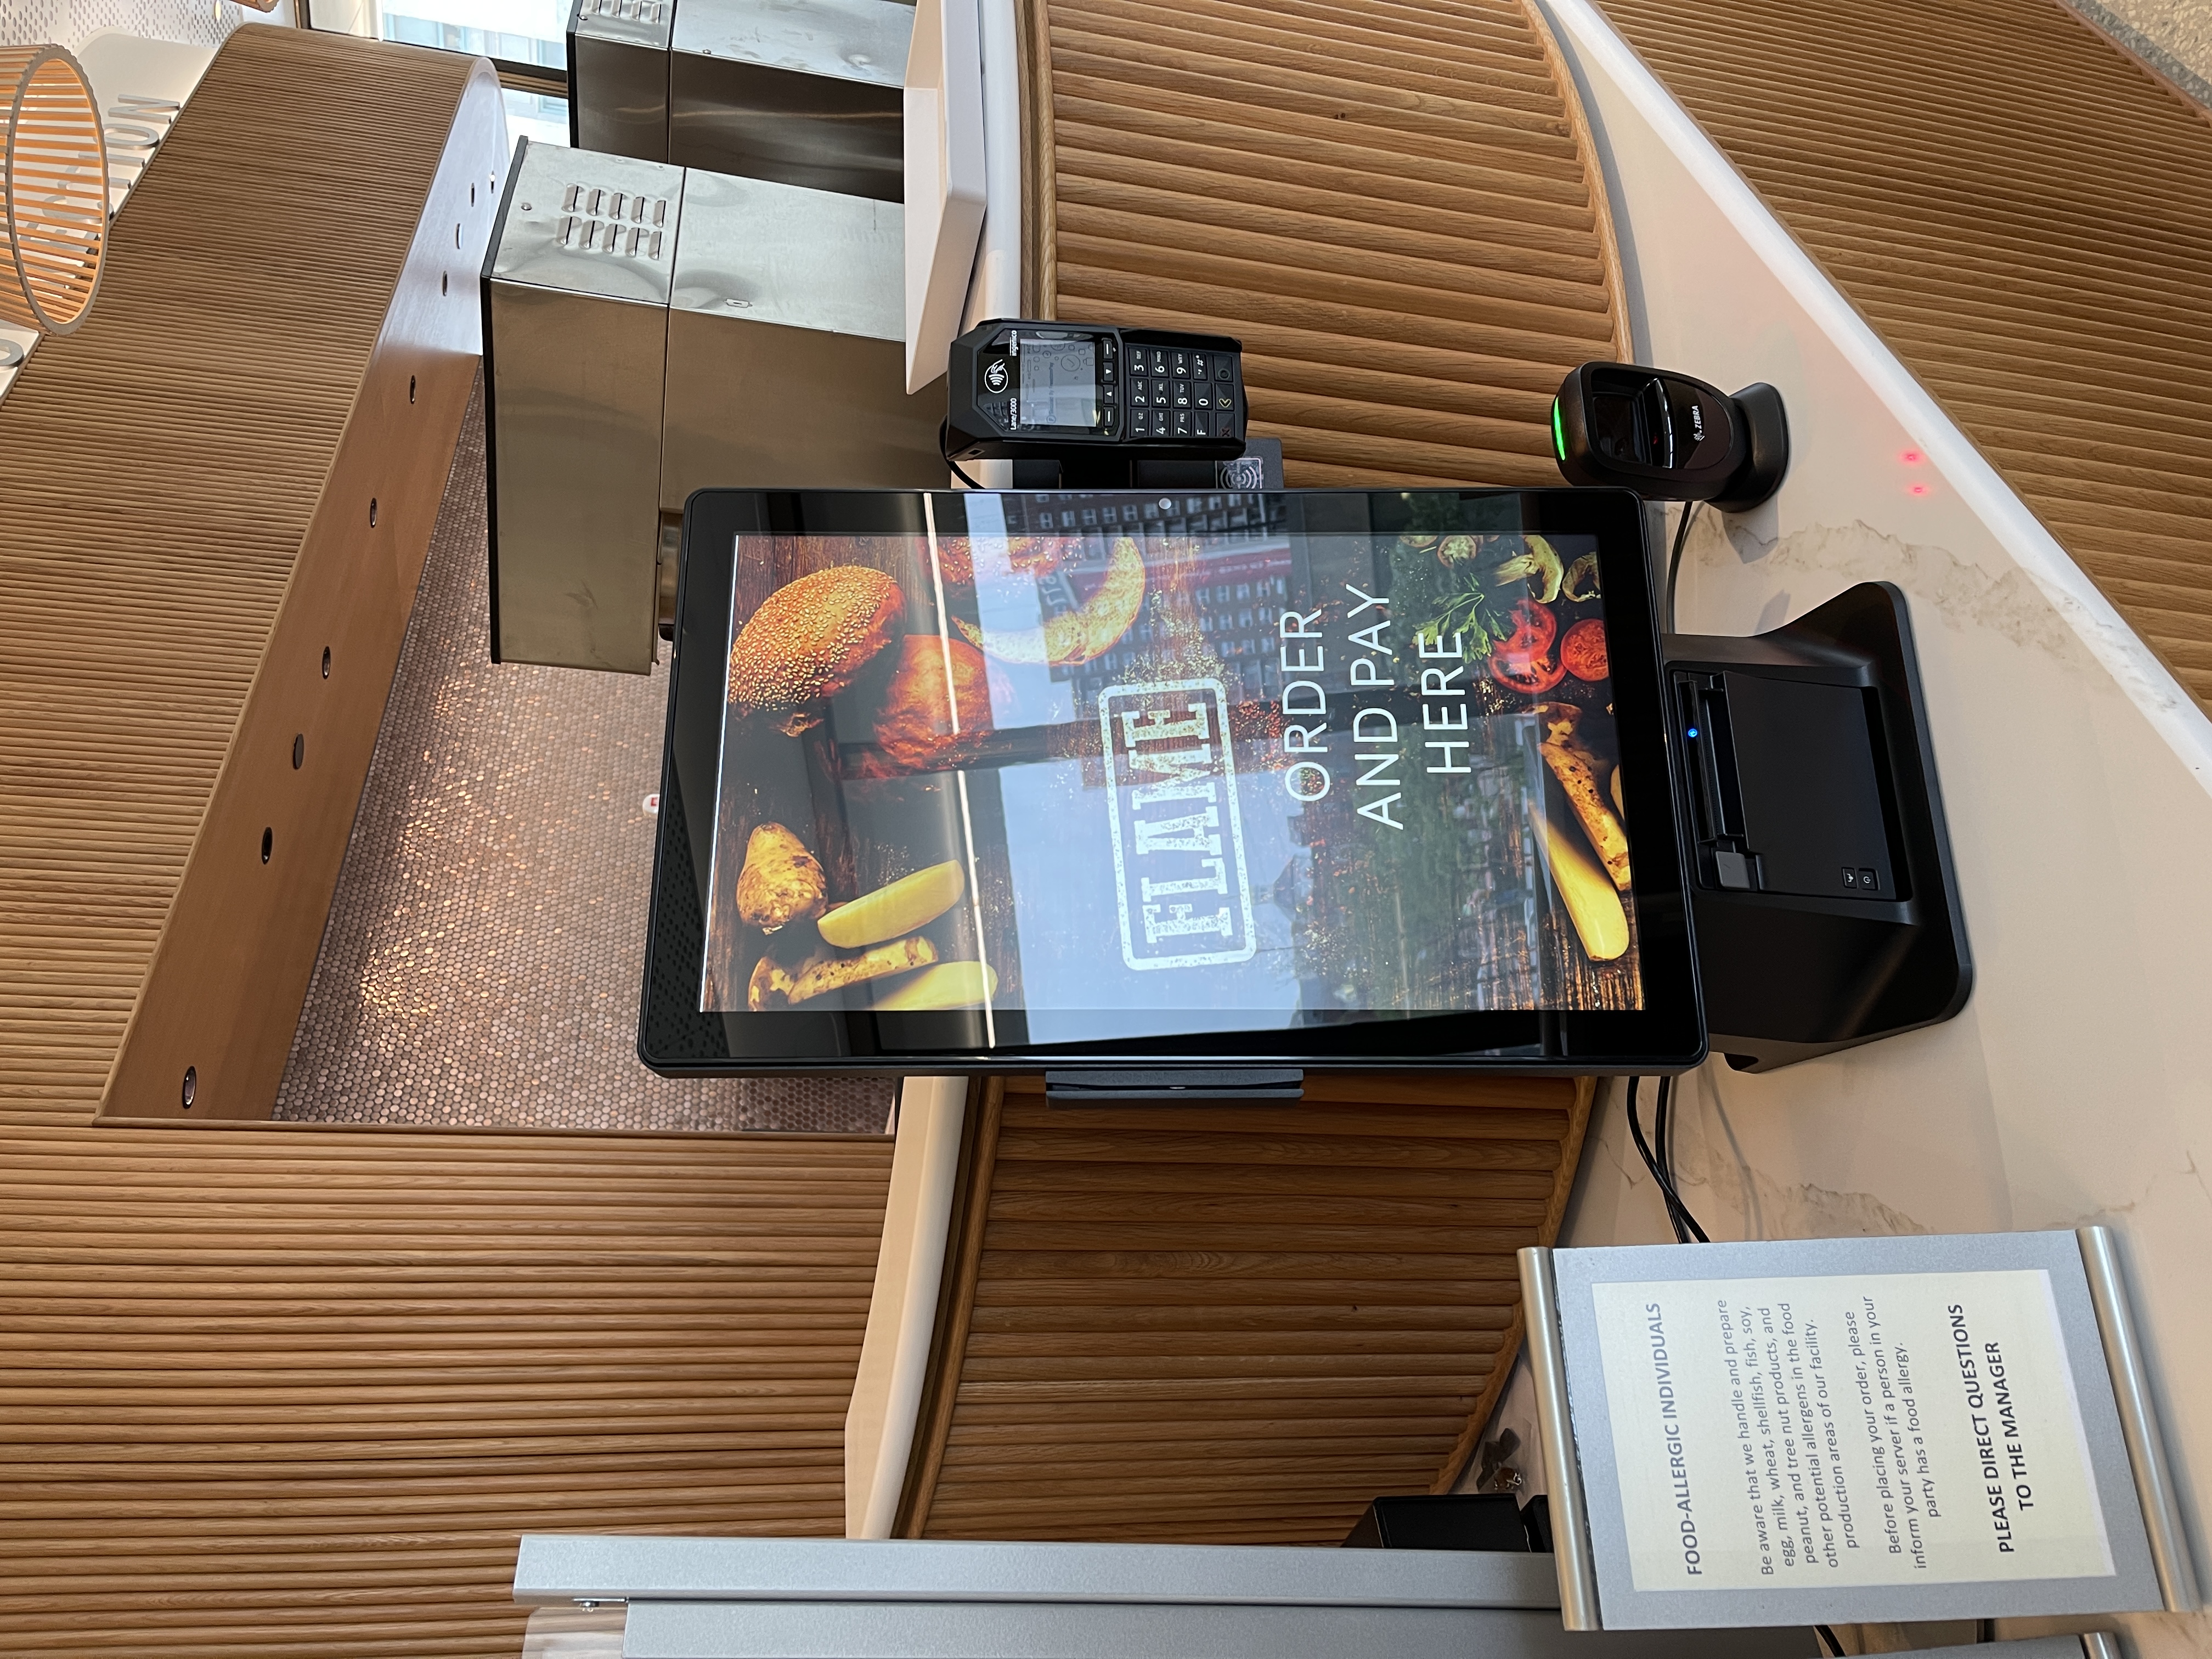 touch-screen point-of-sale system in the café. The screen says Flame - order and pay here. There is a card reader on the right-hand side.